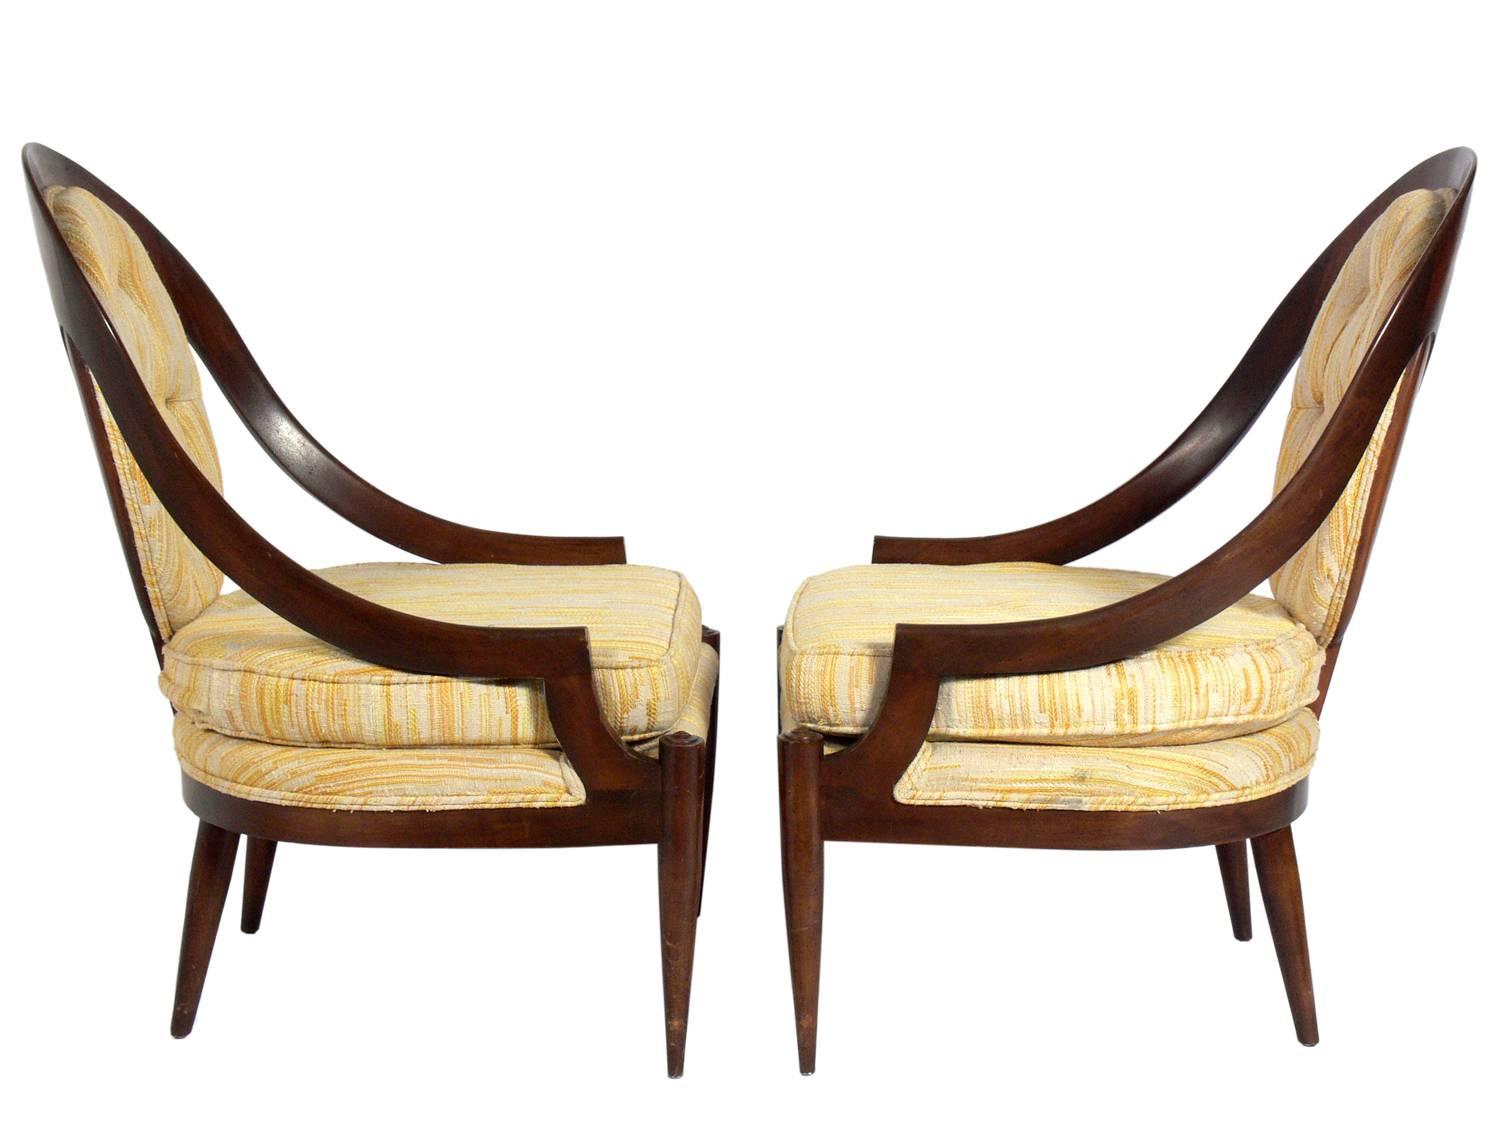 Pair of curvaceous spoonback lounge chairs, American, circa 1950s. They will need to be reupholstered. The price noted below includes reupholster in your fabric.